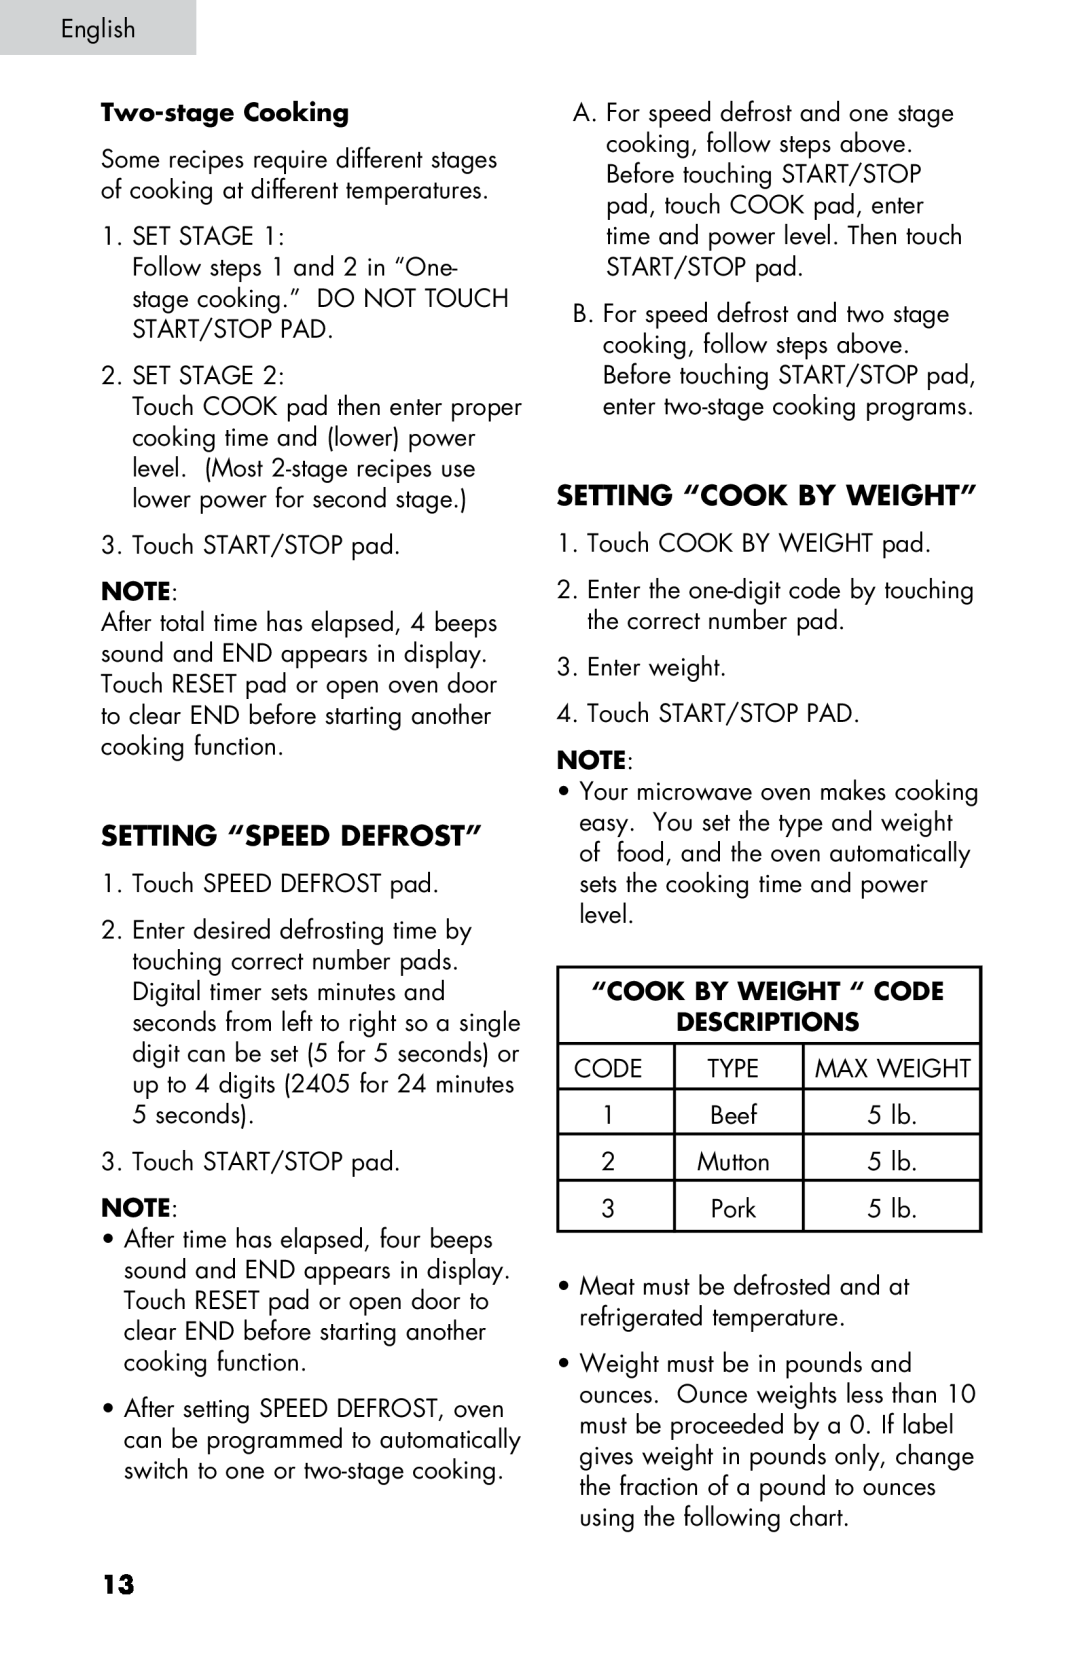 Summit SM900WH Setting “Speed Defrost”, Setting “Cook By Weight”, Two-stageCooking, “Cook By Weight “ Code Descriptions 